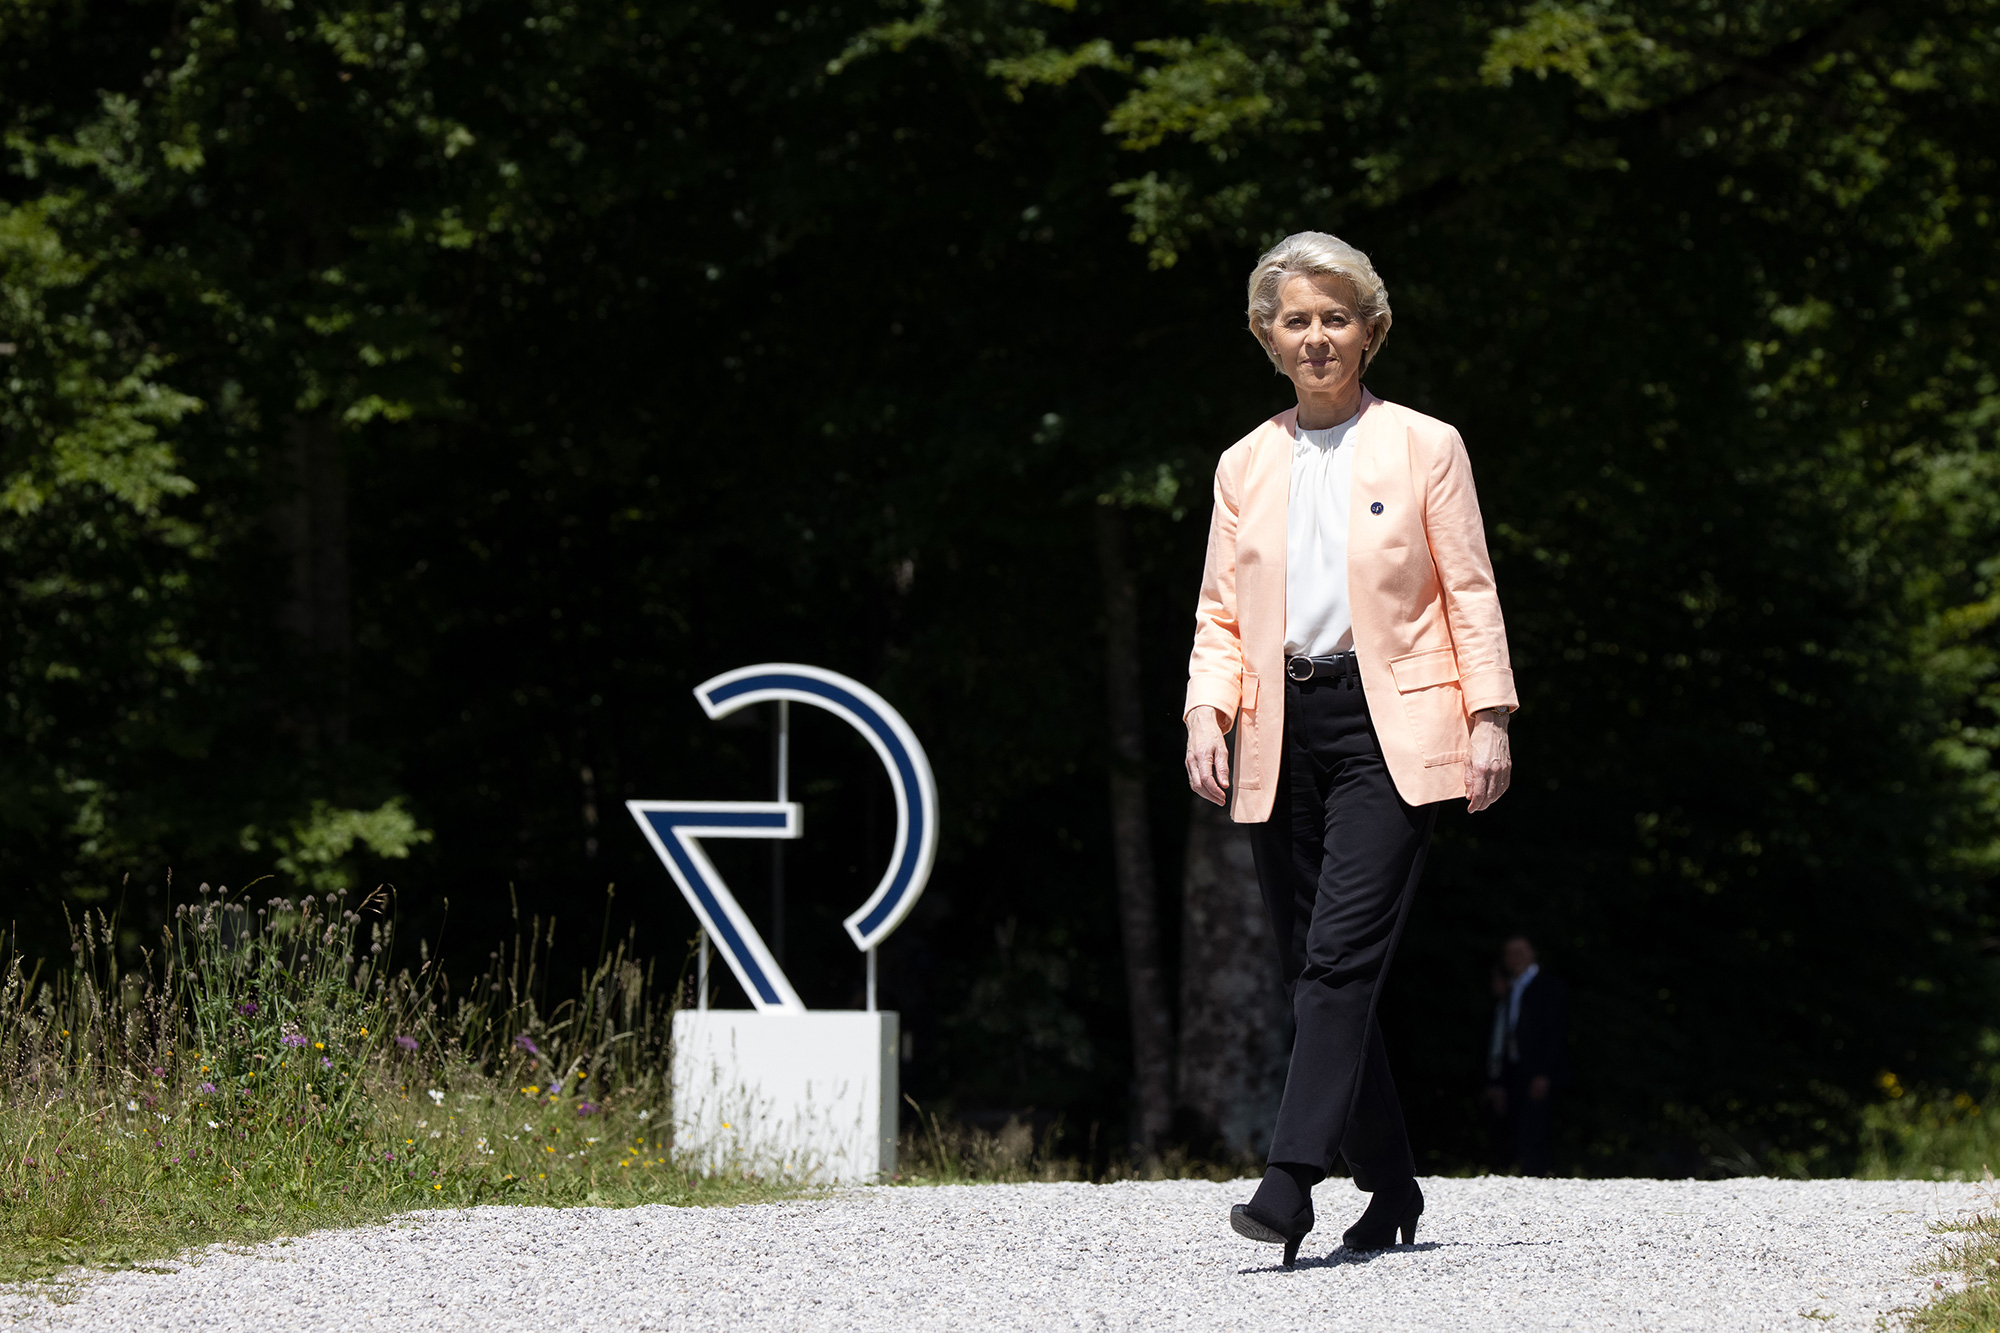 President of the European Commission Ursula von der Leyen arrives at the G7 leaders summit in Elmau, Germany, on Sunday, June 26.